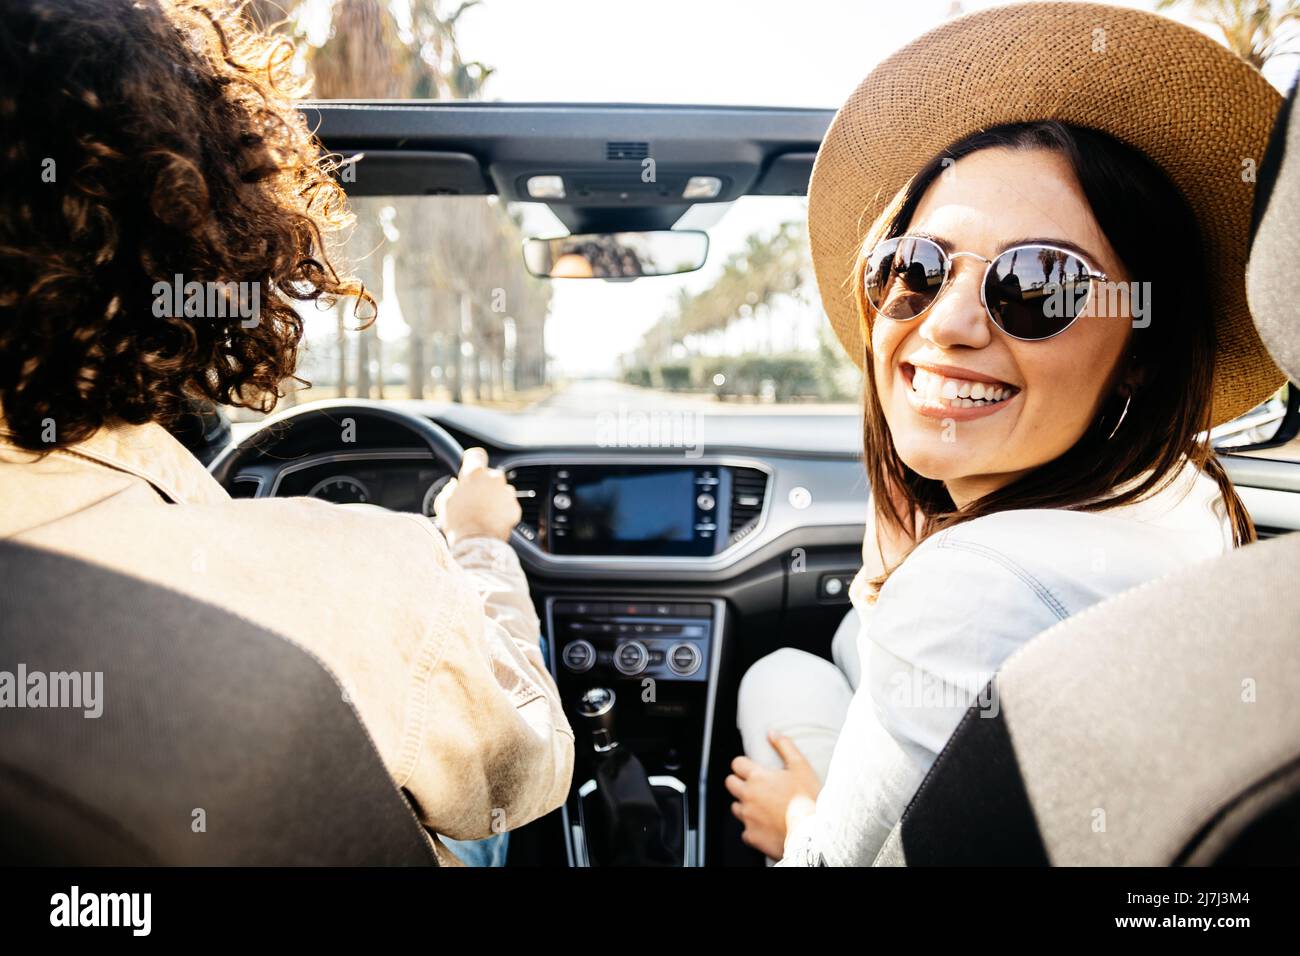 Couple enjoying a road trip together on a cabriolet. Stock Photo